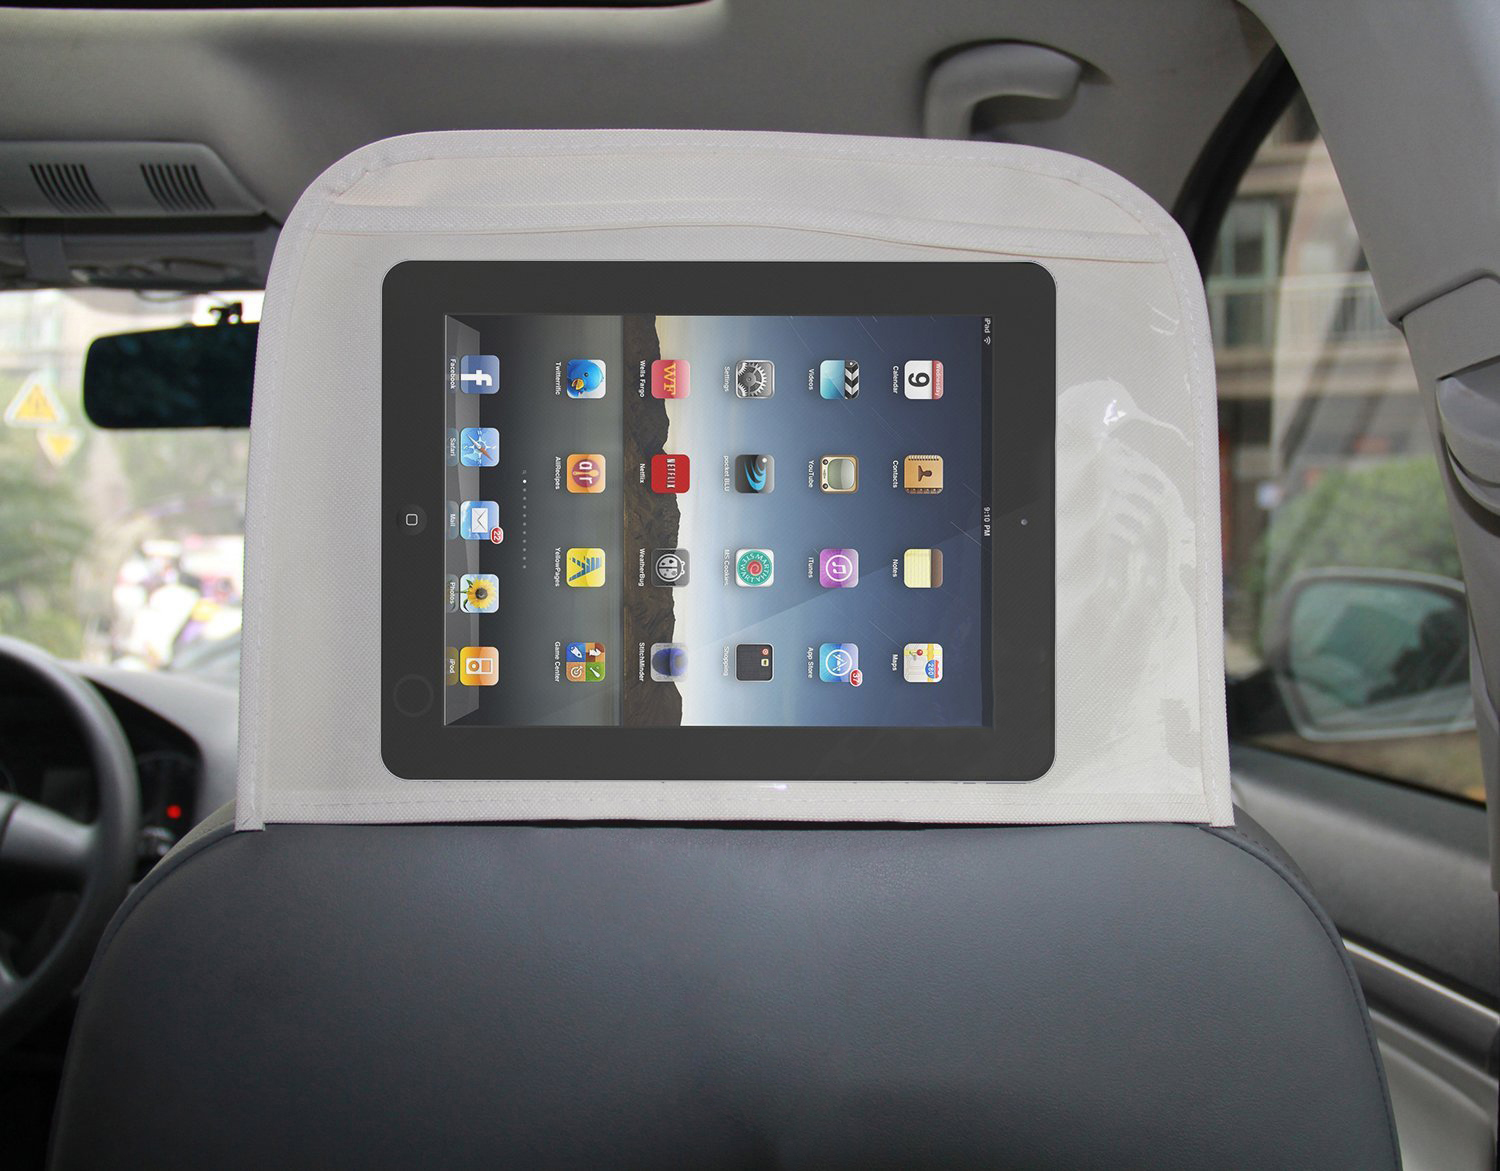 Backseat Car Organizer with Touch Screen Ipad Tablet Holder, Universal Headrest Cover